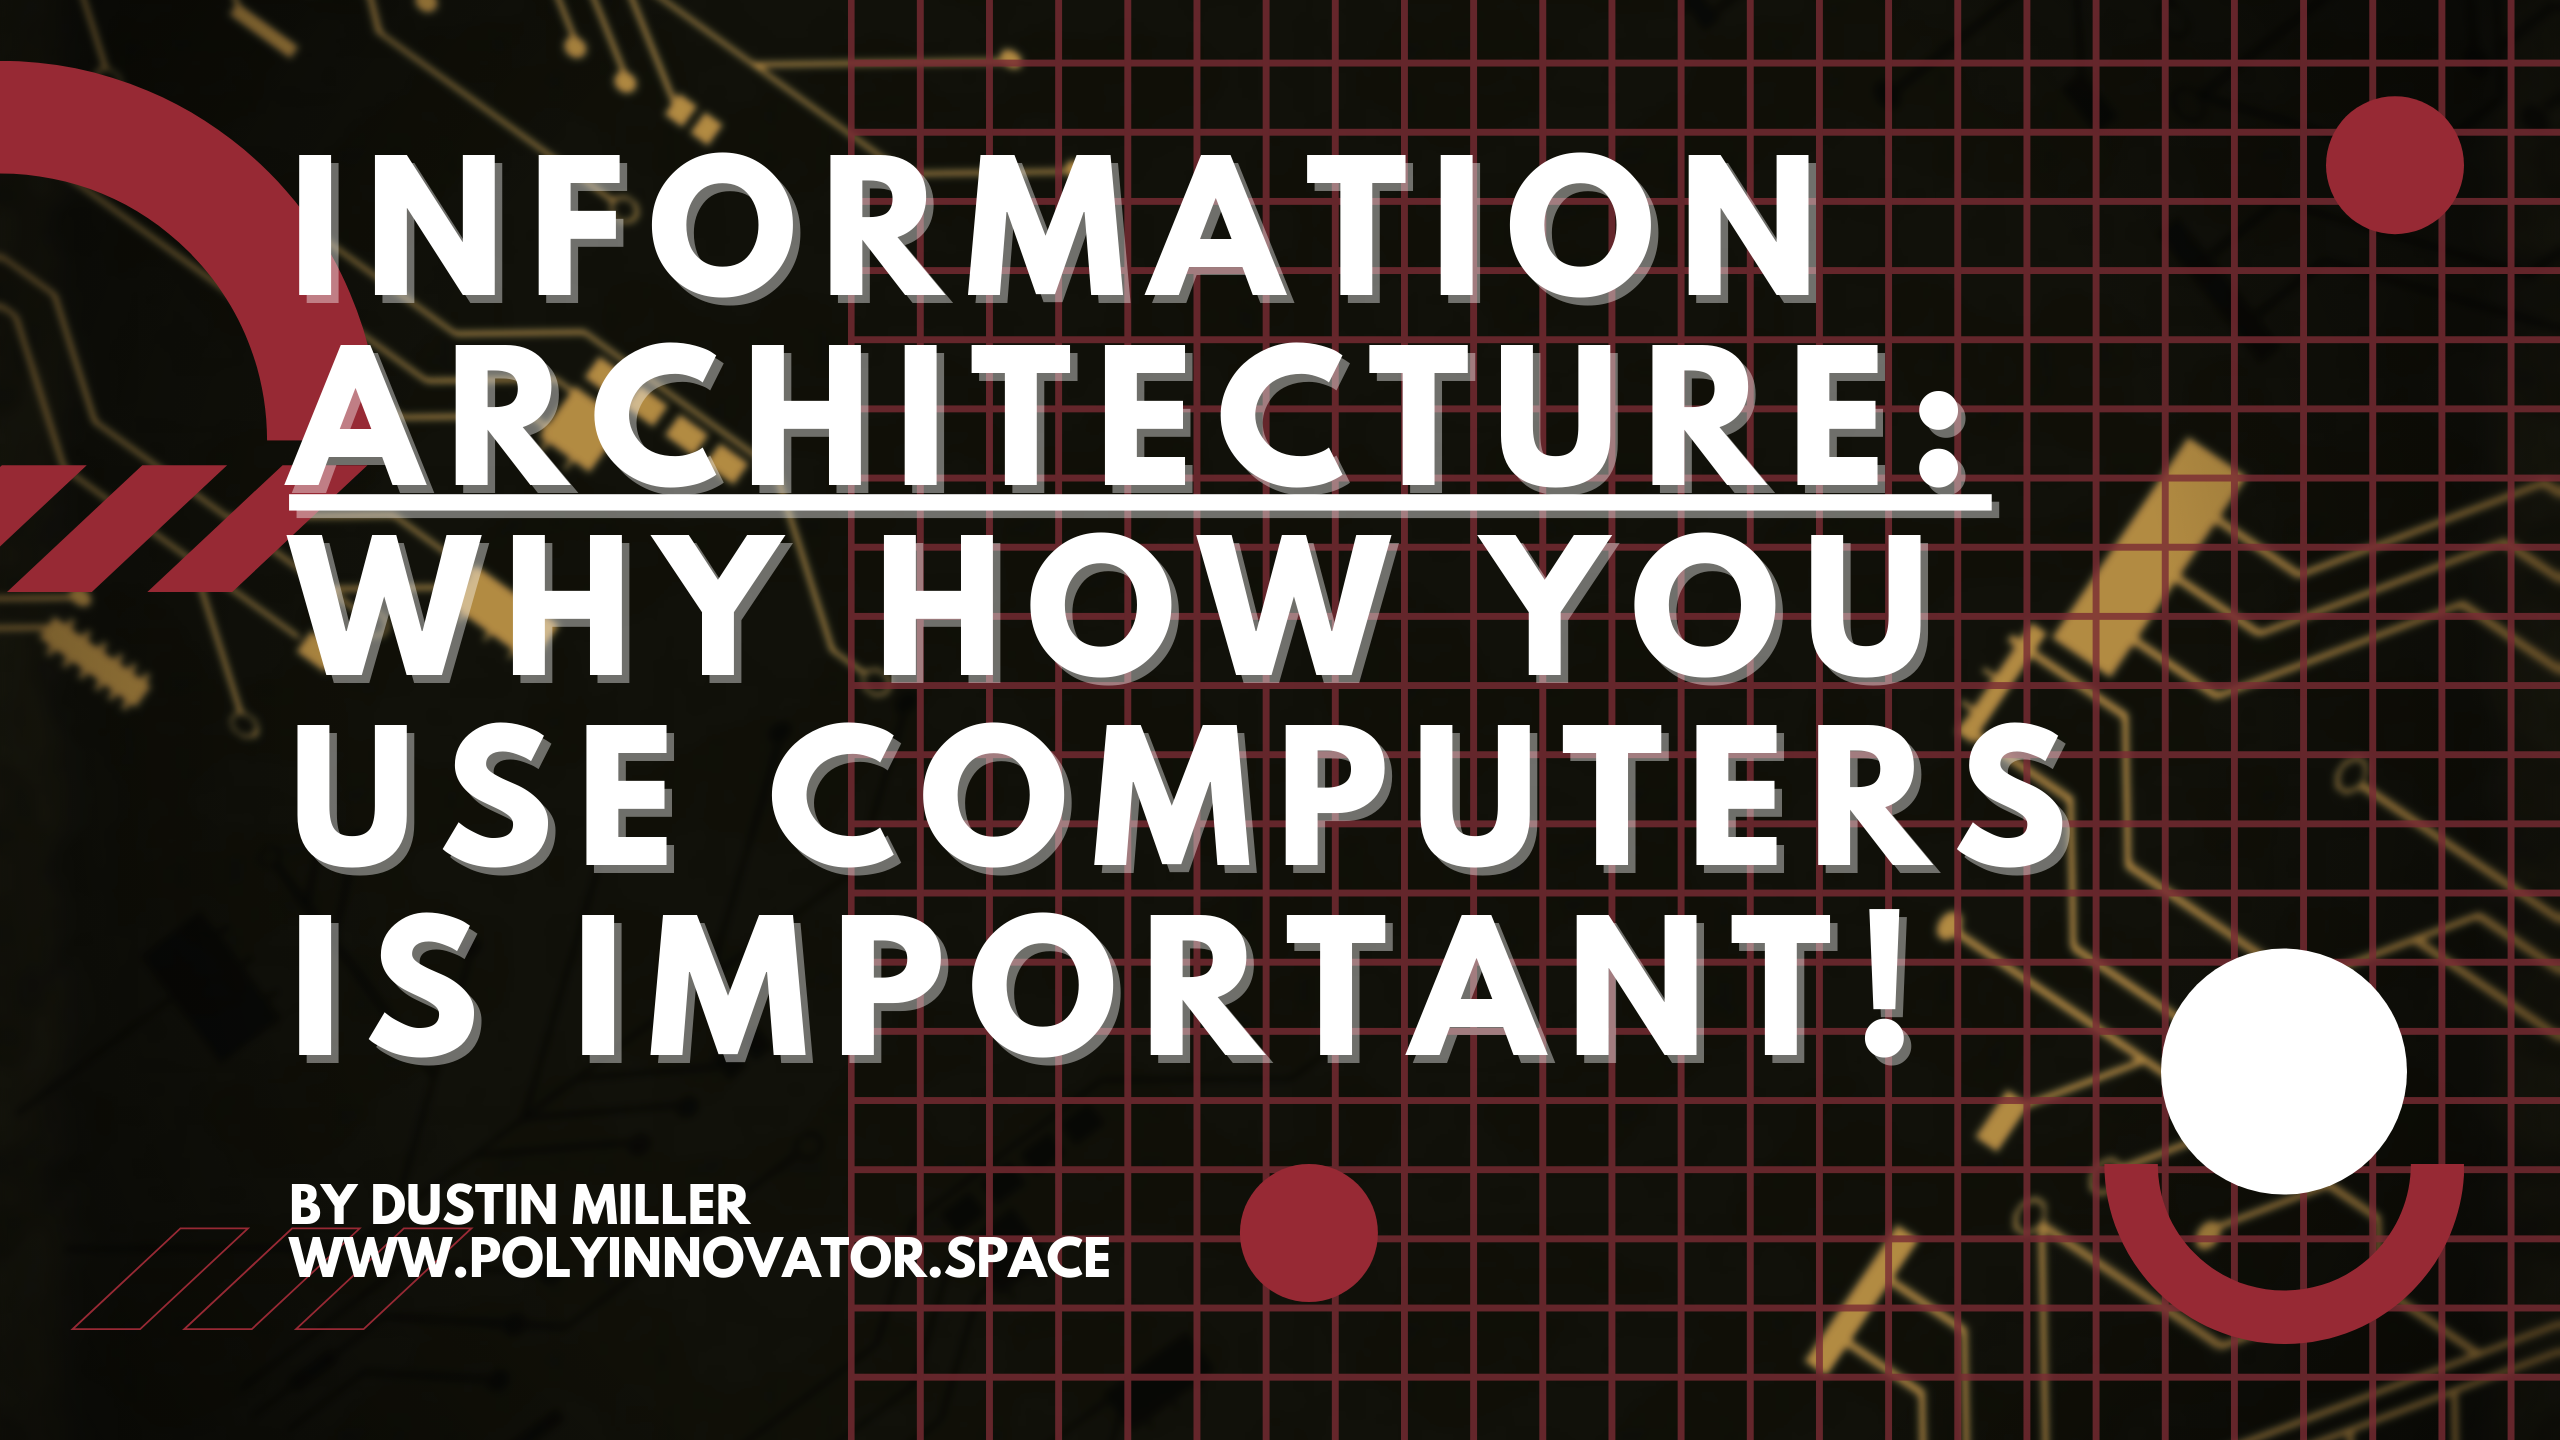 Information Architecture: Why how you use Computers is Important!